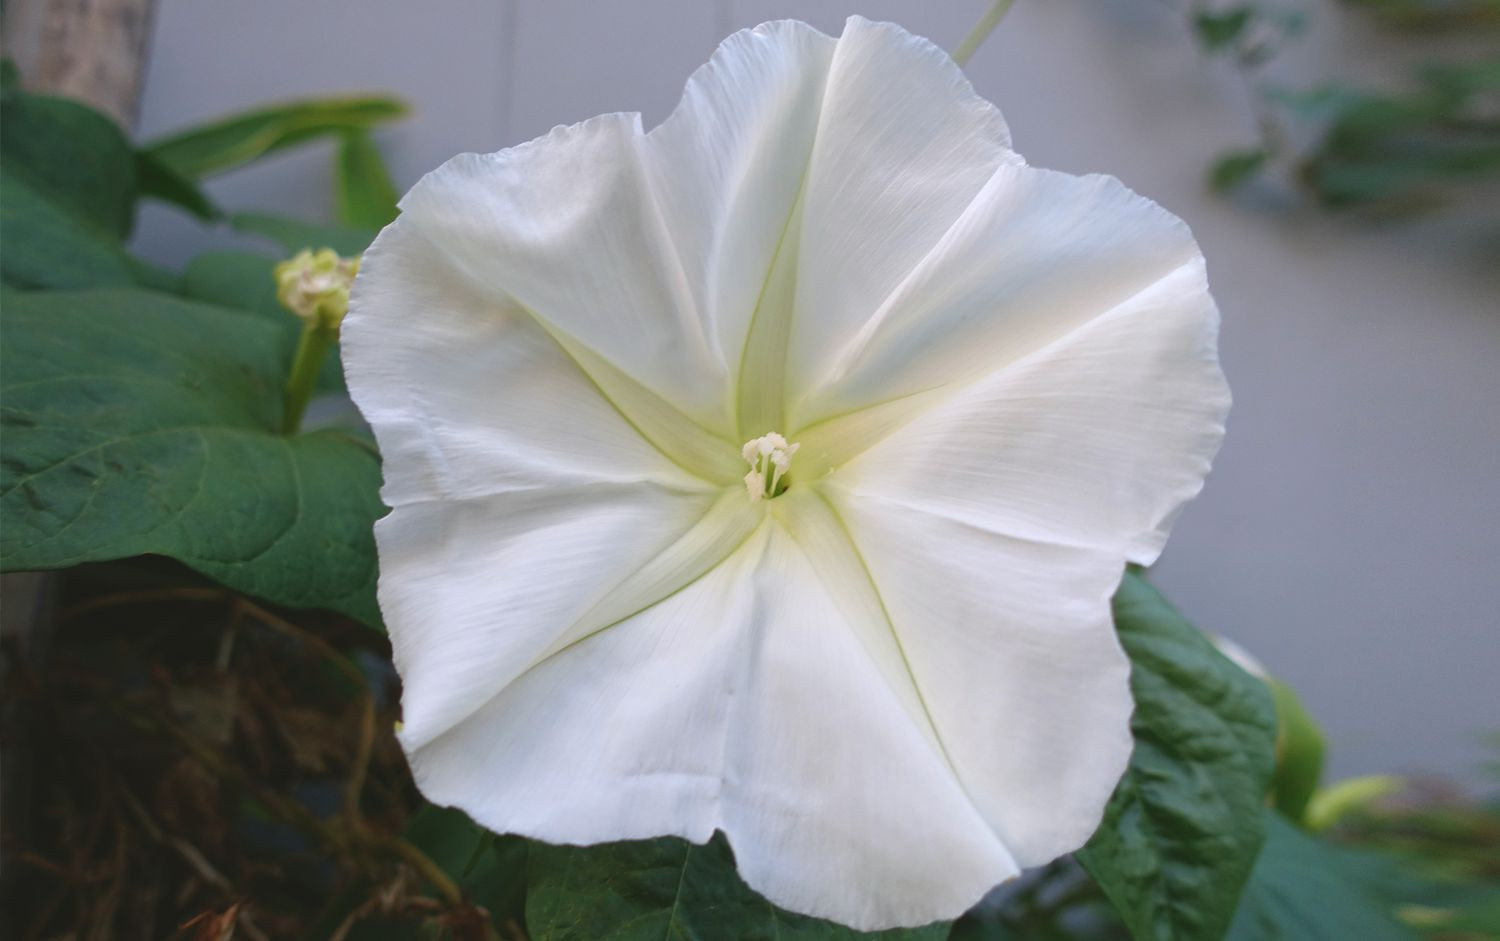 Moonflower Vine Blooms At Night For A Magical Garden After Dark